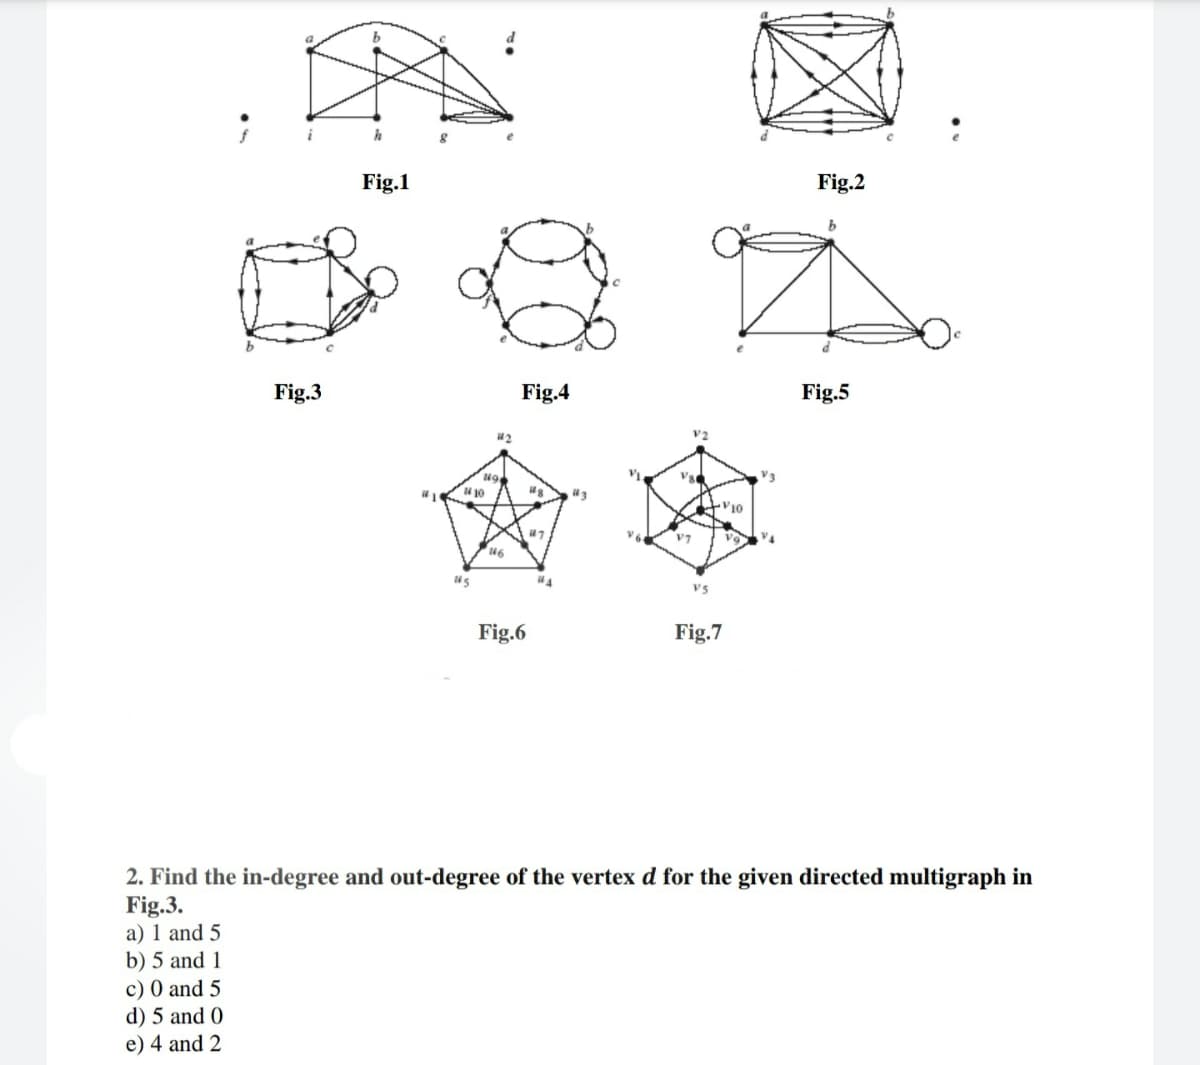 Fig.1
Fig.2
Fig.3
Fig.4
Fig.5
V10
V4
vs
Fig.6
Fig.7
2. Find the in-degree and out-degree of the vertex d for the given directed multigraph in
Fig.3.
a) 1 and 5
b) 5 and 1
c) 0 and 5
d) 5 and 0
e) 4 and 2
